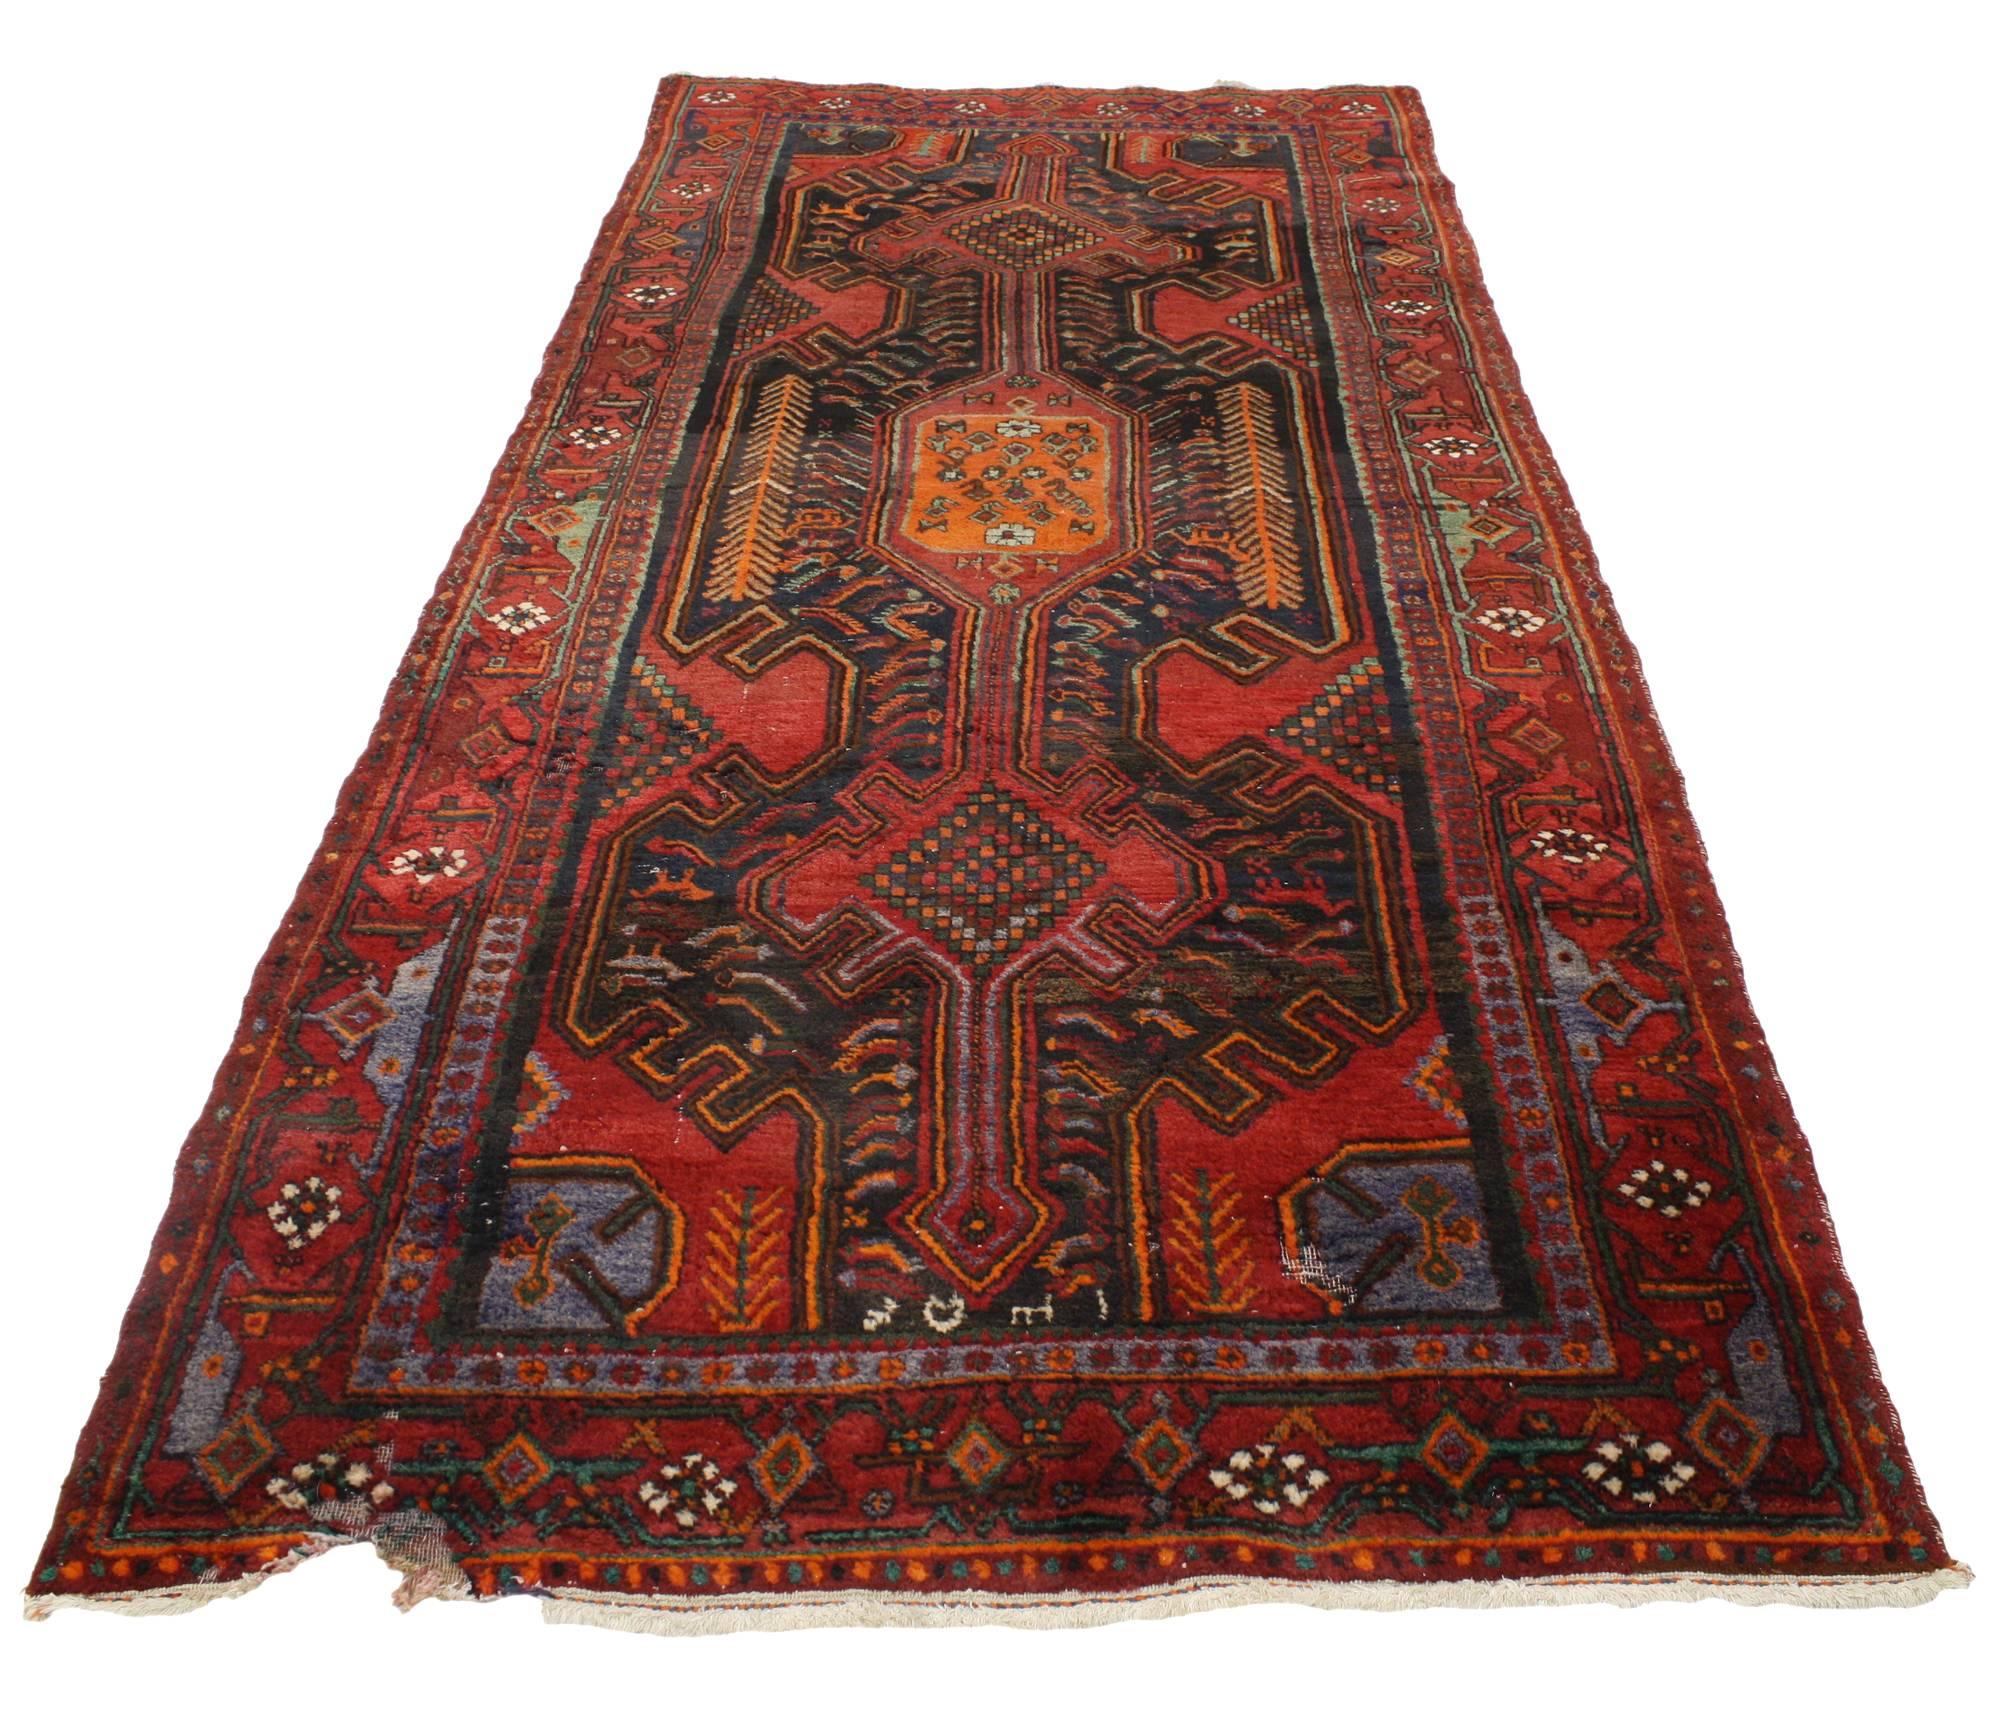 76898, a vintage Hamadan rug with geometric hunting design. This hand-knotted wool vintage Persian Hamadan rug features the perfect amount of wear and displays a centre row of geometric symbols dotted with tiny flowers on a field of deep red.